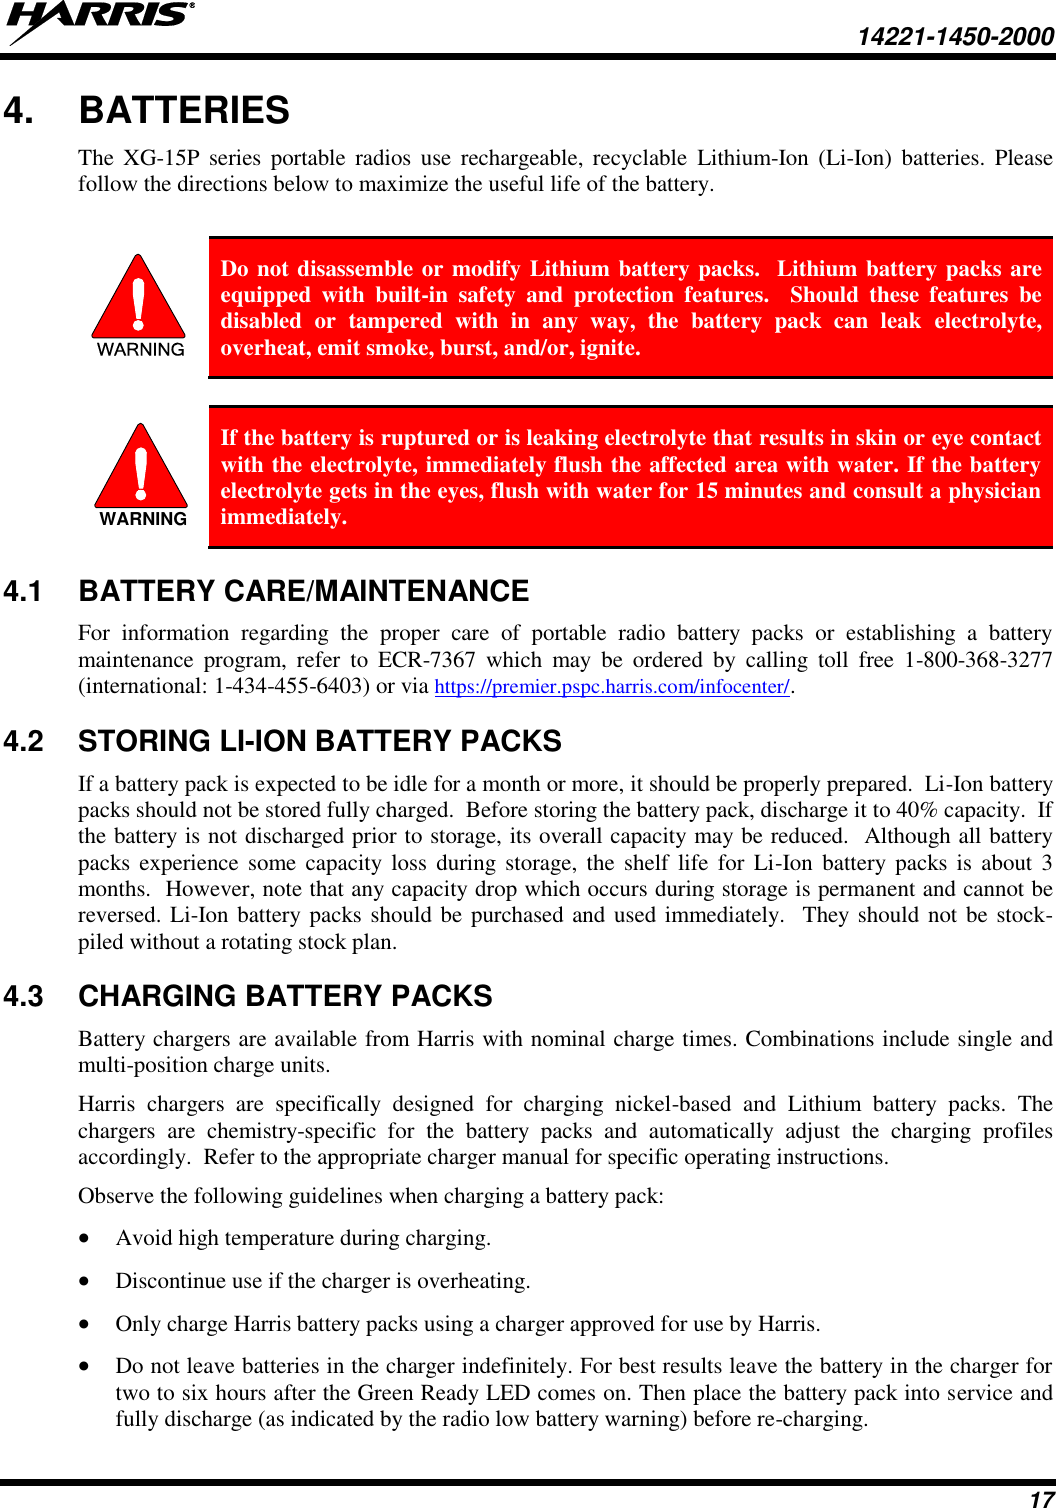   14221-1450-2000  17 4.  BATTERIES The  XG-15P  series  portable radios  use  rechargeable,  recyclable  Lithium-Ion (Li-Ion)  batteries.  Please follow the directions below to maximize the useful life of the battery.  WARNING Do not disassemble or modify Lithium battery packs.  Lithium battery packs are equipped  with  built-in  safety  and  protection  features.    Should  these  features  be disabled  or  tampered  with  in  any  way,  the  battery  pack  can  leak  electrolyte, overheat, emit smoke, burst, and/or, ignite.   If the battery is ruptured or is leaking electrolyte that results in skin or eye contact with the electrolyte, immediately flush the affected area with water. If the battery electrolyte gets in the eyes, flush with water for 15 minutes and consult a physician immediately. 4.1  BATTERY CARE/MAINTENANCE For  information  regarding  the  proper  care  of  portable  radio  battery  packs  or  establishing  a  battery maintenance  program,  refer  to  ECR-7367  which  may  be  ordered  by  calling  toll  free  1-800-368-3277 (international: 1-434-455-6403) or via https://premier.pspc.harris.com/infocenter/. 4.2  STORING LI-ION BATTERY PACKS If a battery pack is expected to be idle for a month or more, it should be properly prepared.  Li-Ion battery packs should not be stored fully charged.  Before storing the battery pack, discharge it to 40% capacity.  If the battery is not discharged prior to storage, its overall capacity may be reduced.  Although all battery packs experience  some  capacity loss during storage, the  shelf  life  for Li-Ion  battery packs is about  3 months.  However, note that any capacity drop which occurs during storage is permanent and cannot be reversed. Li-Ion battery packs should be  purchased and used immediately.  They should not be stock-piled without a rotating stock plan.  4.3  CHARGING BATTERY PACKS Battery chargers are available from Harris with nominal charge times. Combinations include single and multi-position charge units.  Harris  chargers  are  specifically  designed  for  charging  nickel-based  and  Lithium  battery  packs.  The chargers  are  chemistry-specific  for  the  battery  packs  and  automatically  adjust  the  charging  profiles accordingly.  Refer to the appropriate charger manual for specific operating instructions.  Observe the following guidelines when charging a battery pack:  Avoid high temperature during charging.   Discontinue use if the charger is overheating.  Only charge Harris battery packs using a charger approved for use by Harris.  Do not leave batteries in the charger indefinitely. For best results leave the battery in the charger for two to six hours after the Green Ready LED comes on. Then place the battery pack into service and fully discharge (as indicated by the radio low battery warning) before re-charging. WARNING